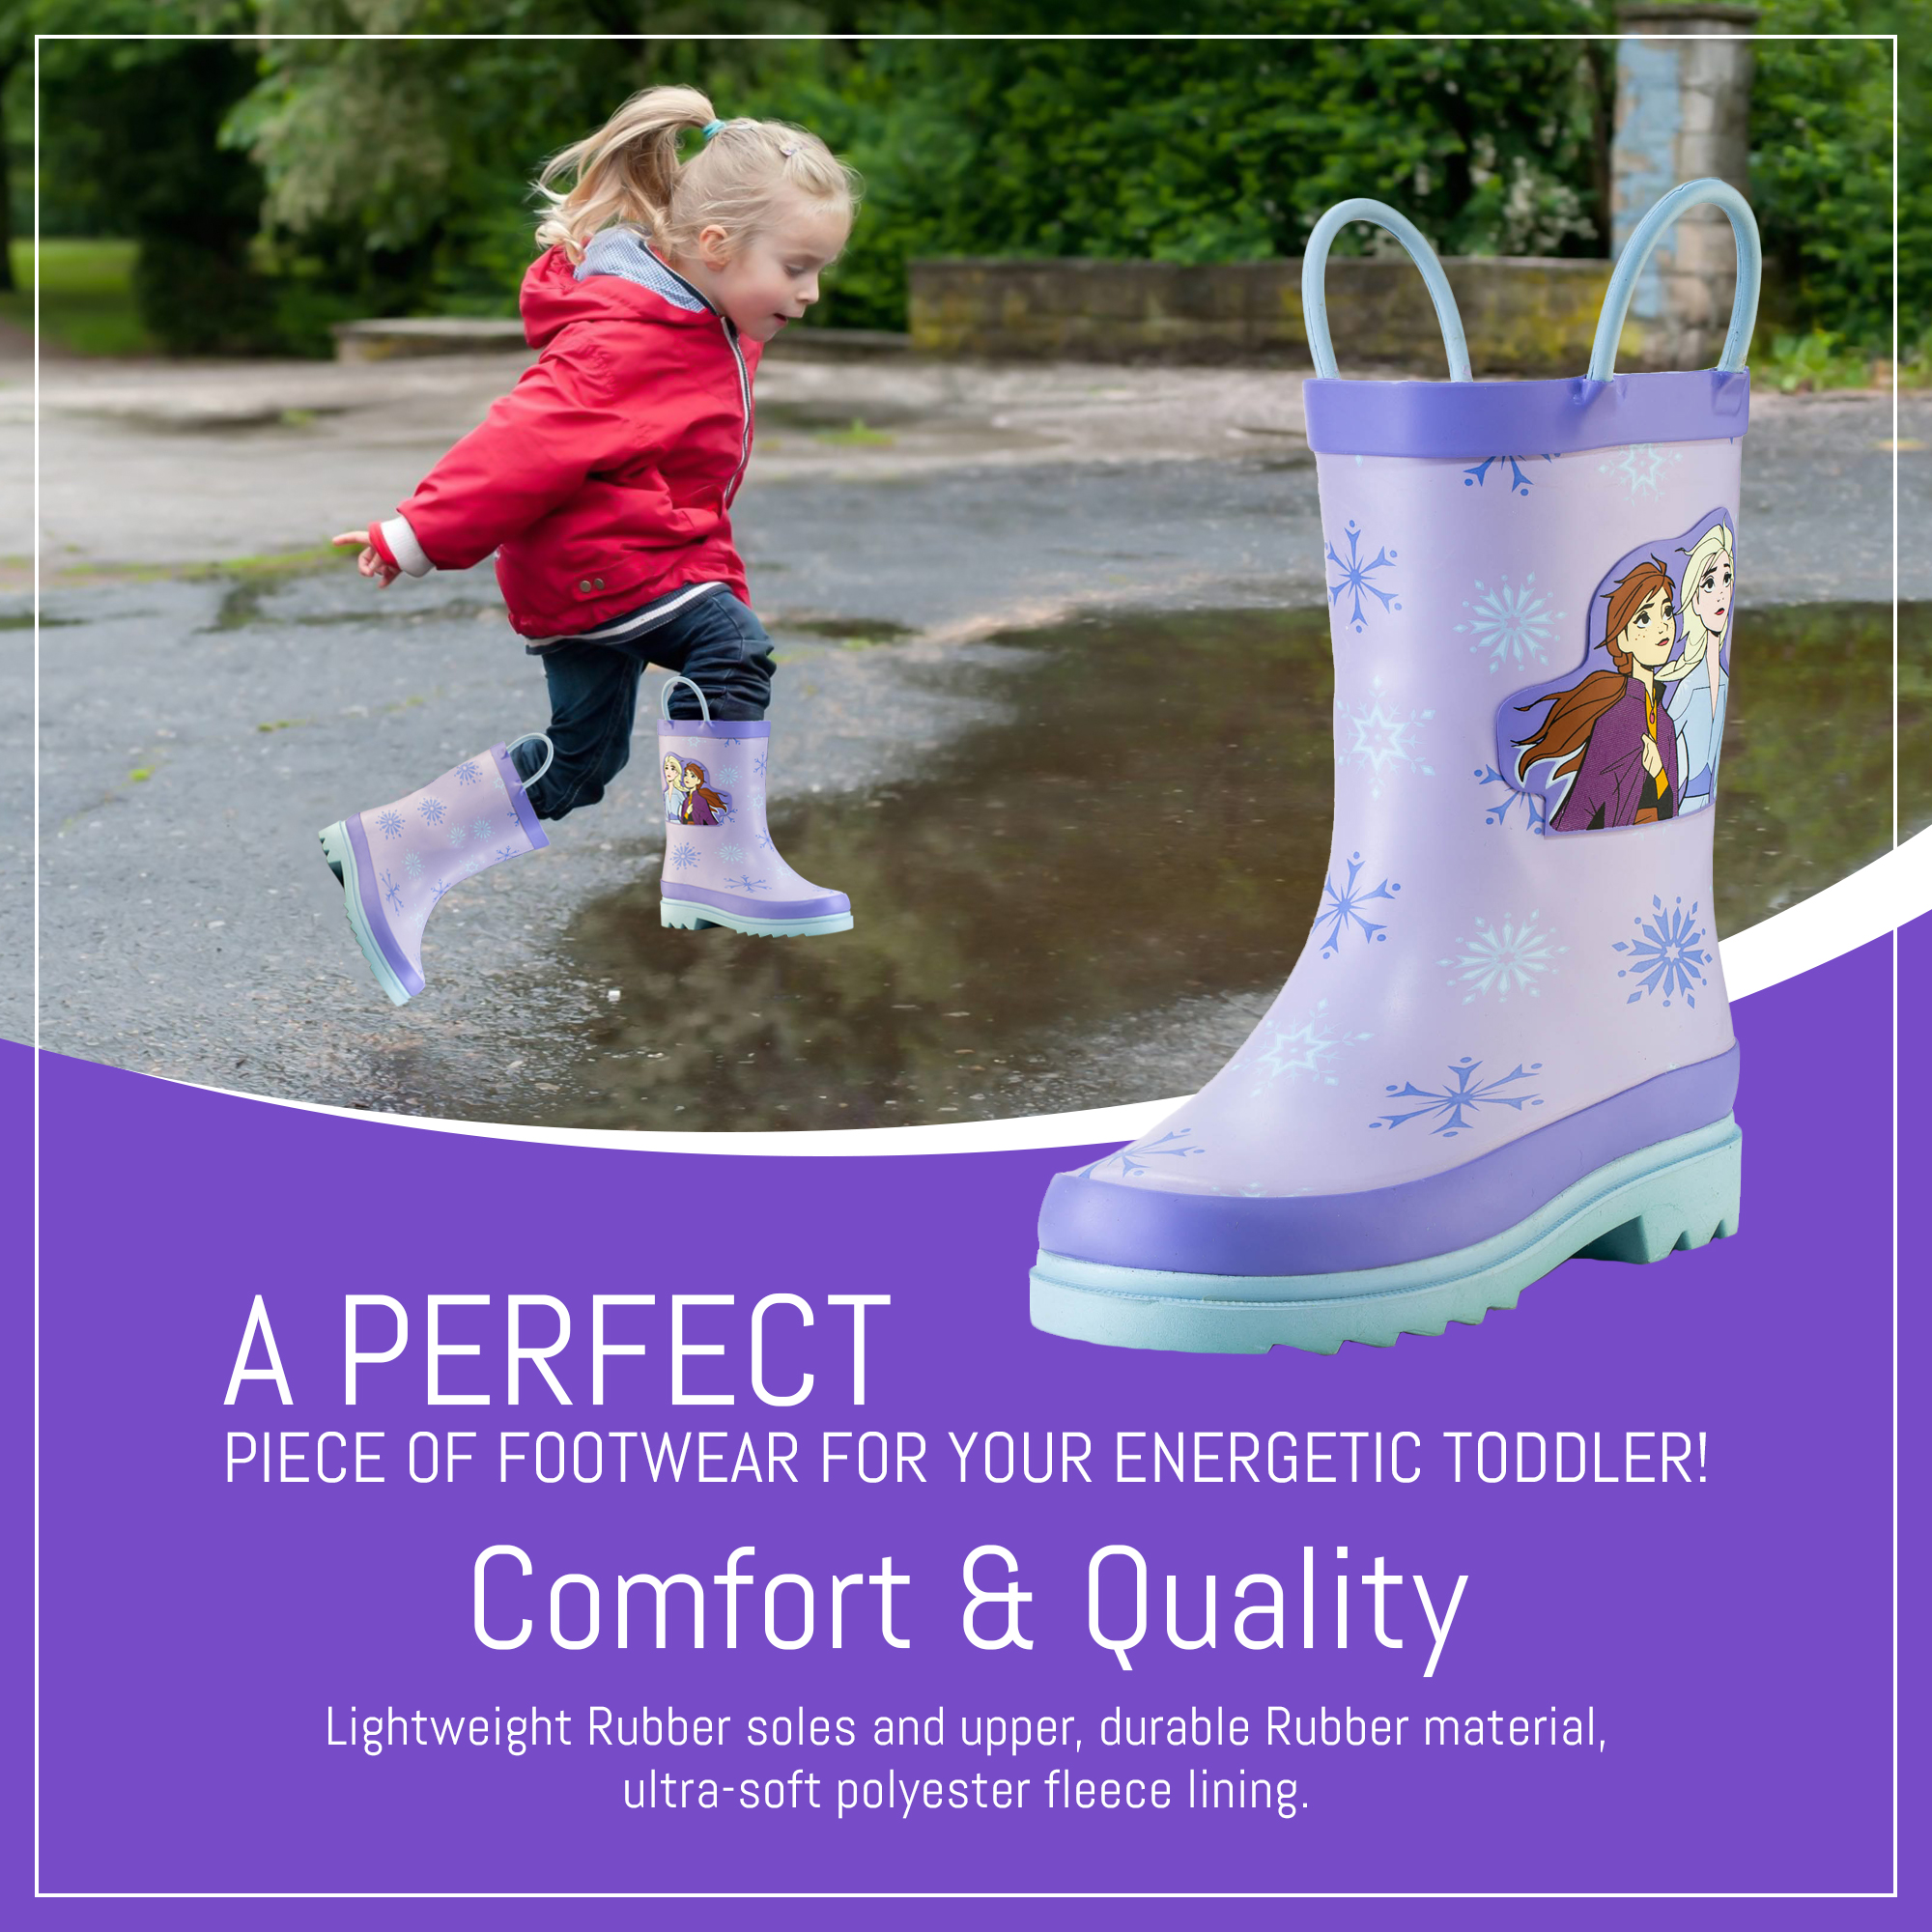 Disney Frozen 2 Girls Anna and Elsa Purple Rubber Easy-On Rain Boots&nbsp;- Size 8 Toddler - image 4 of 7